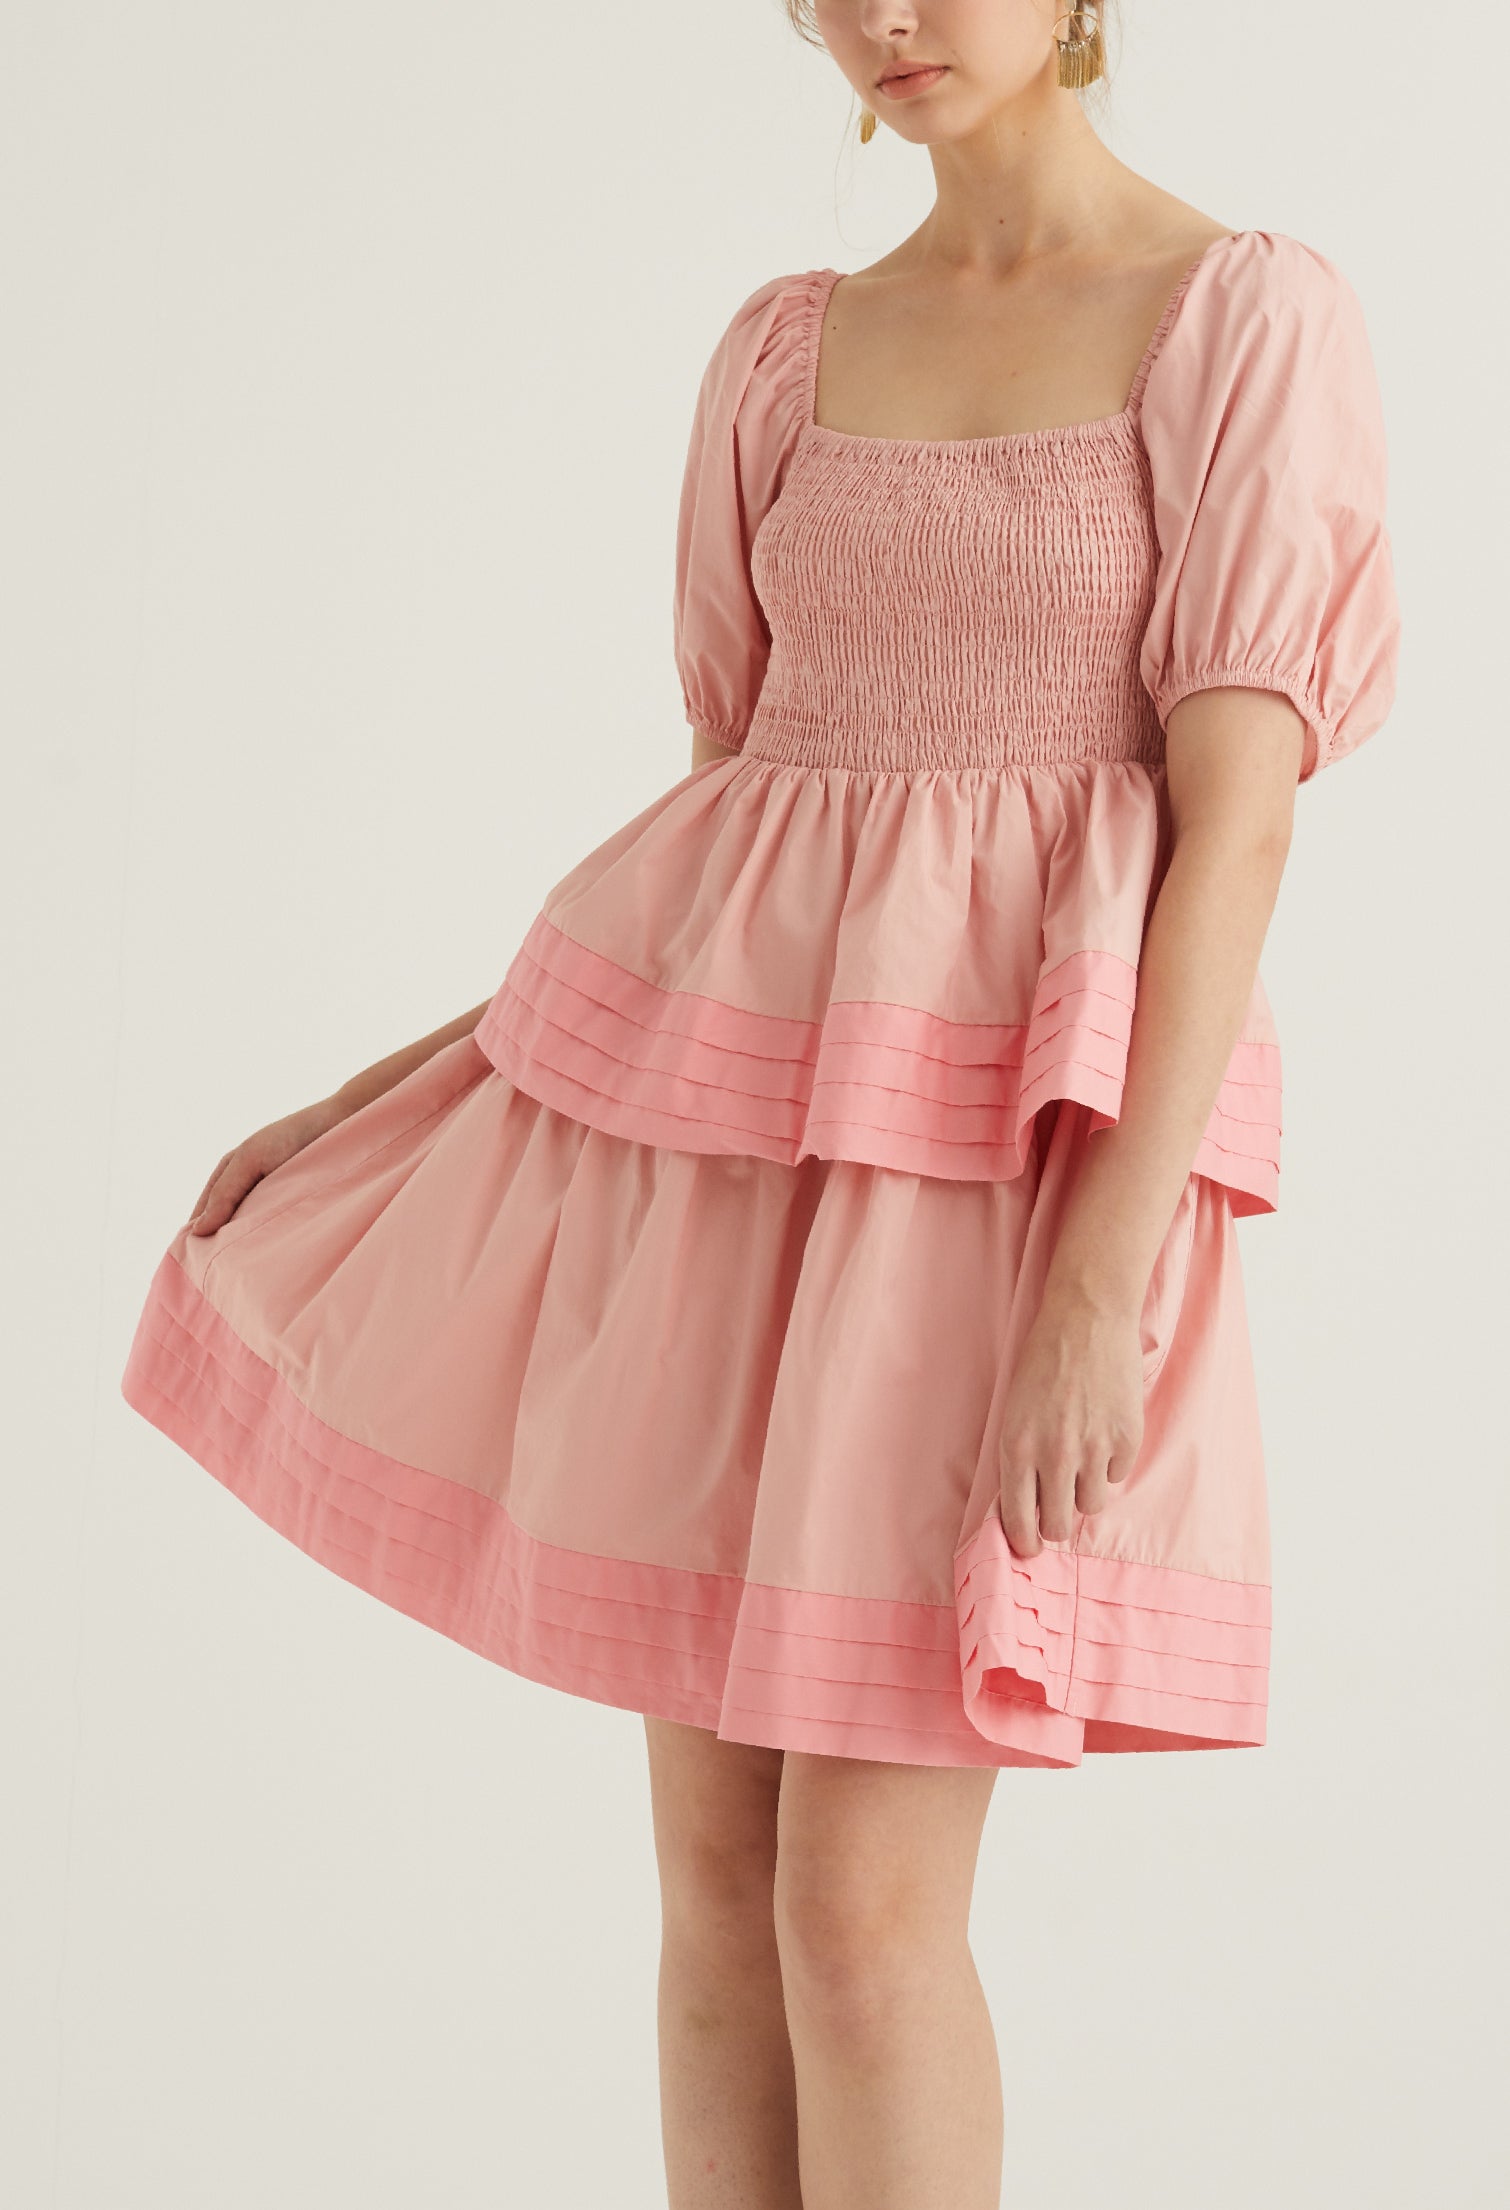 Puffed Sleeved Baby Doll Dress